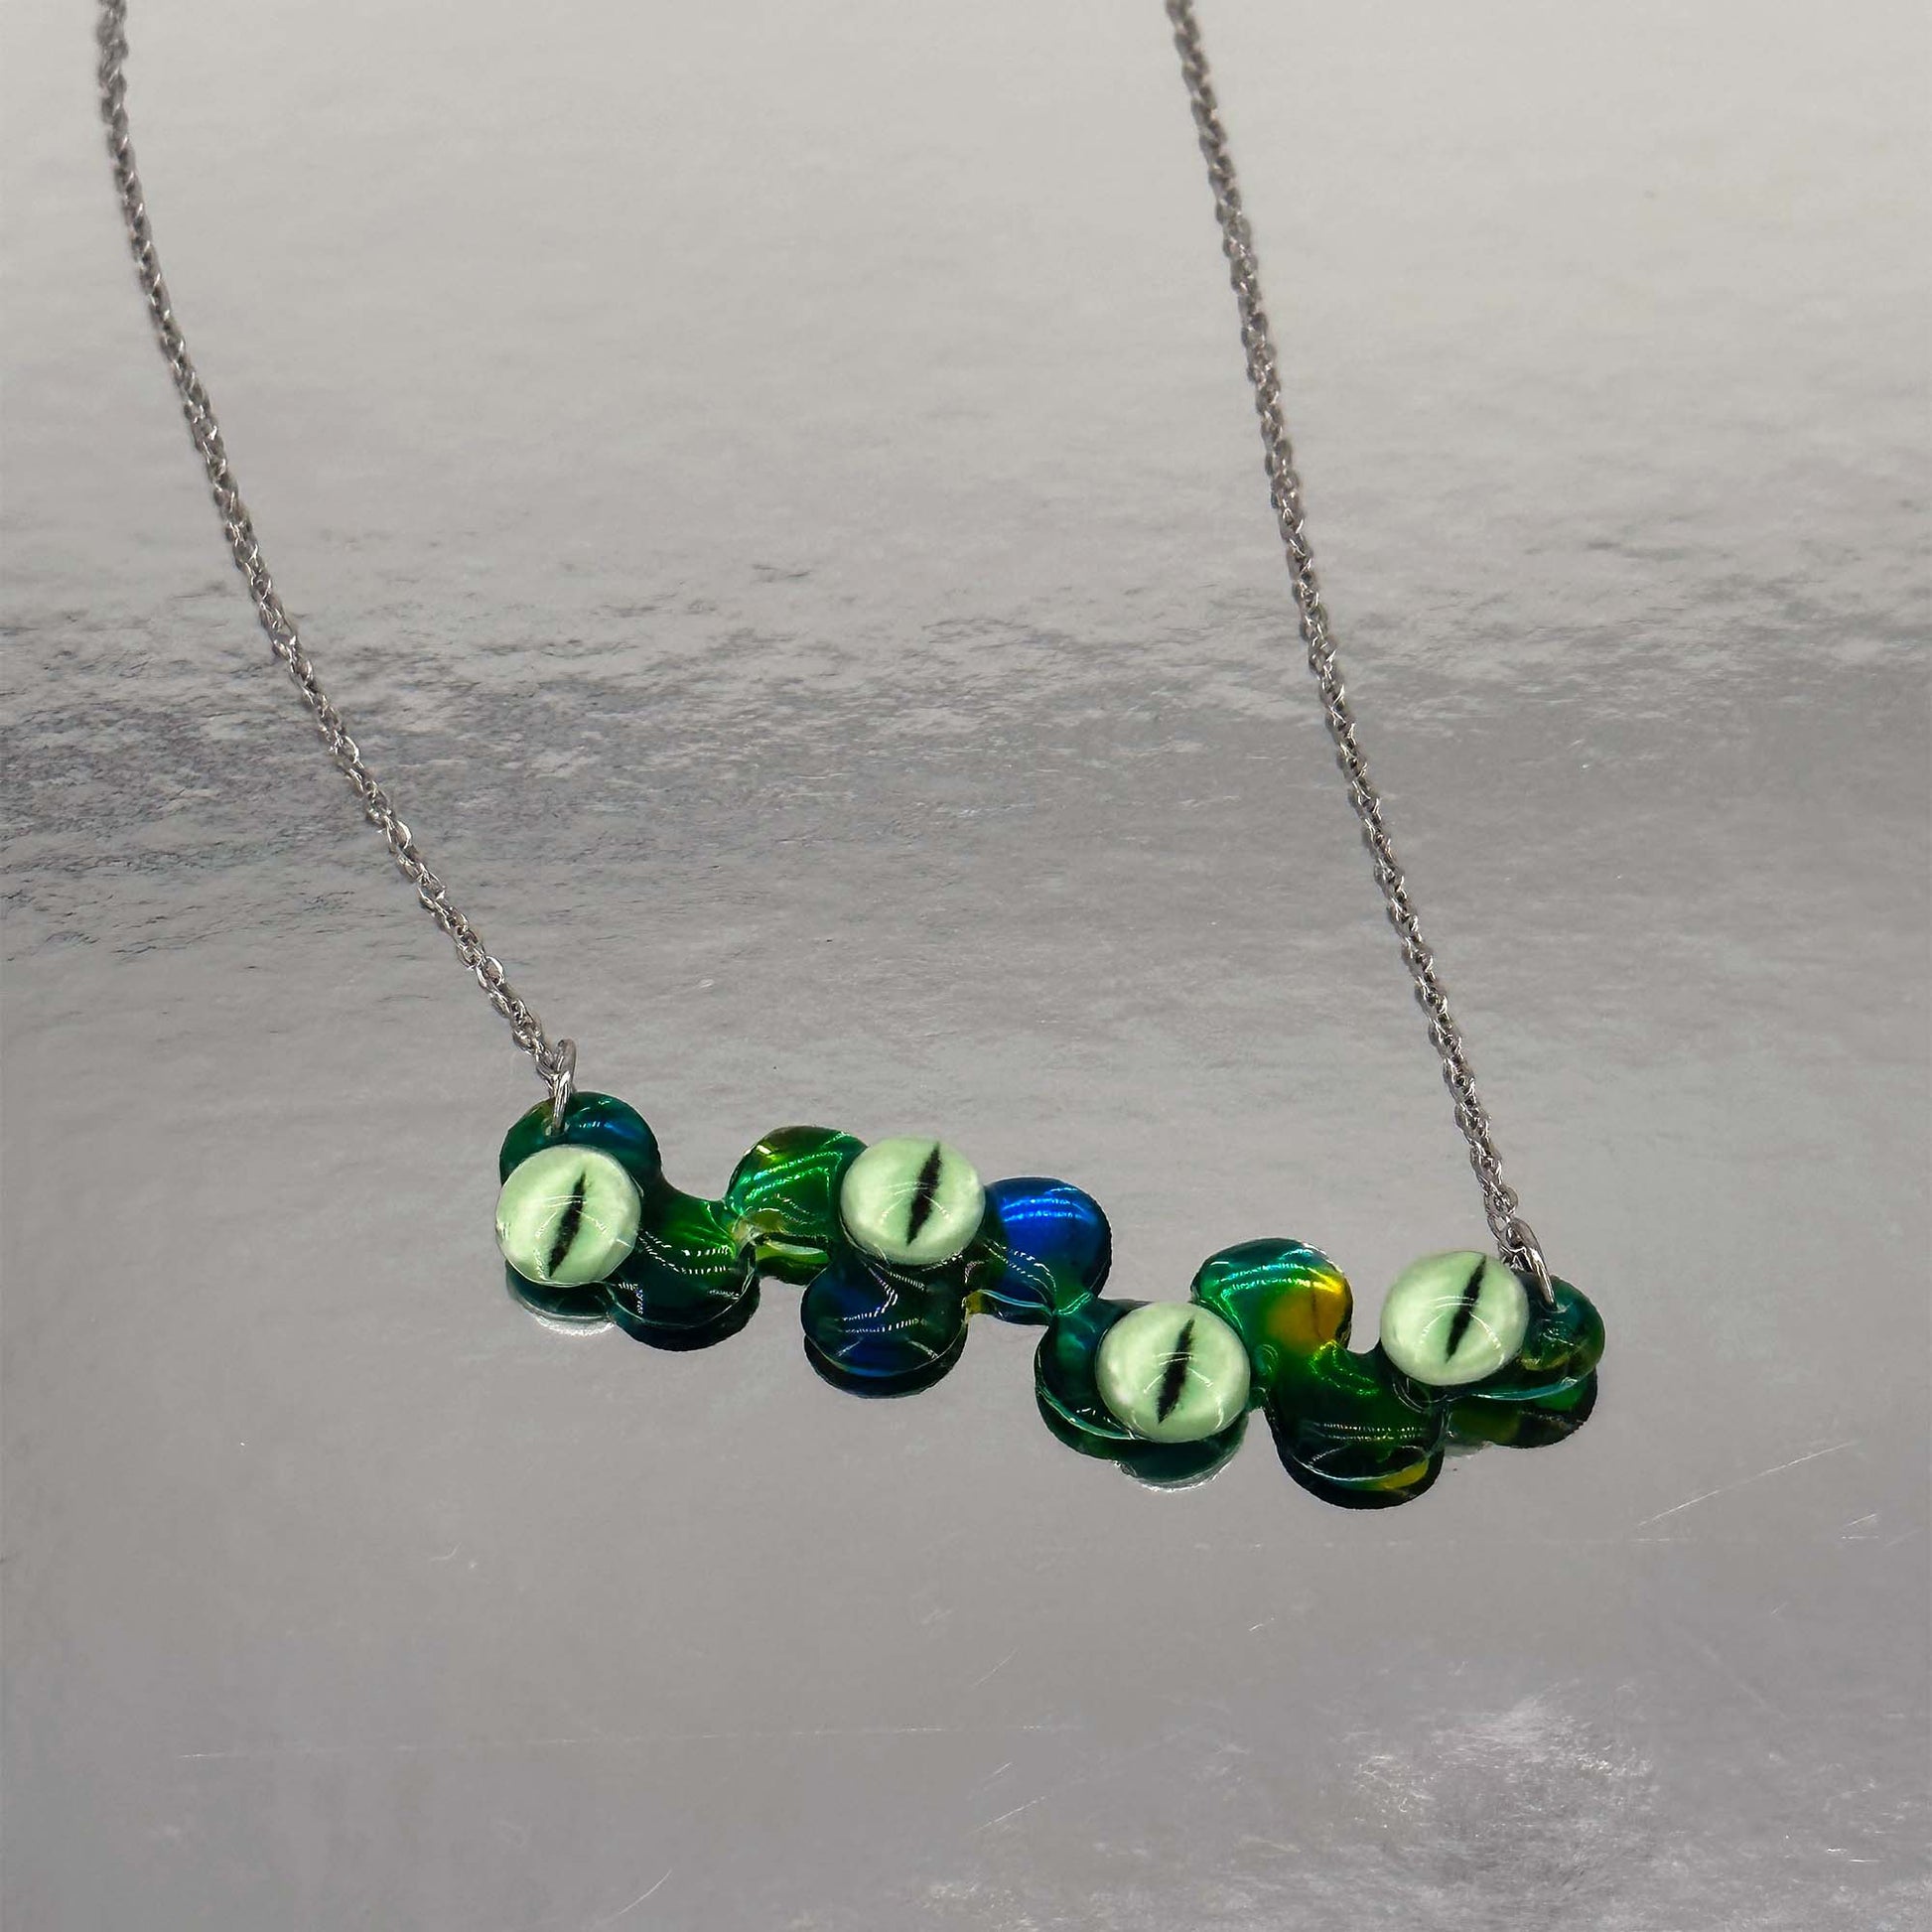 Handmade necklace with green eye elements made of resin